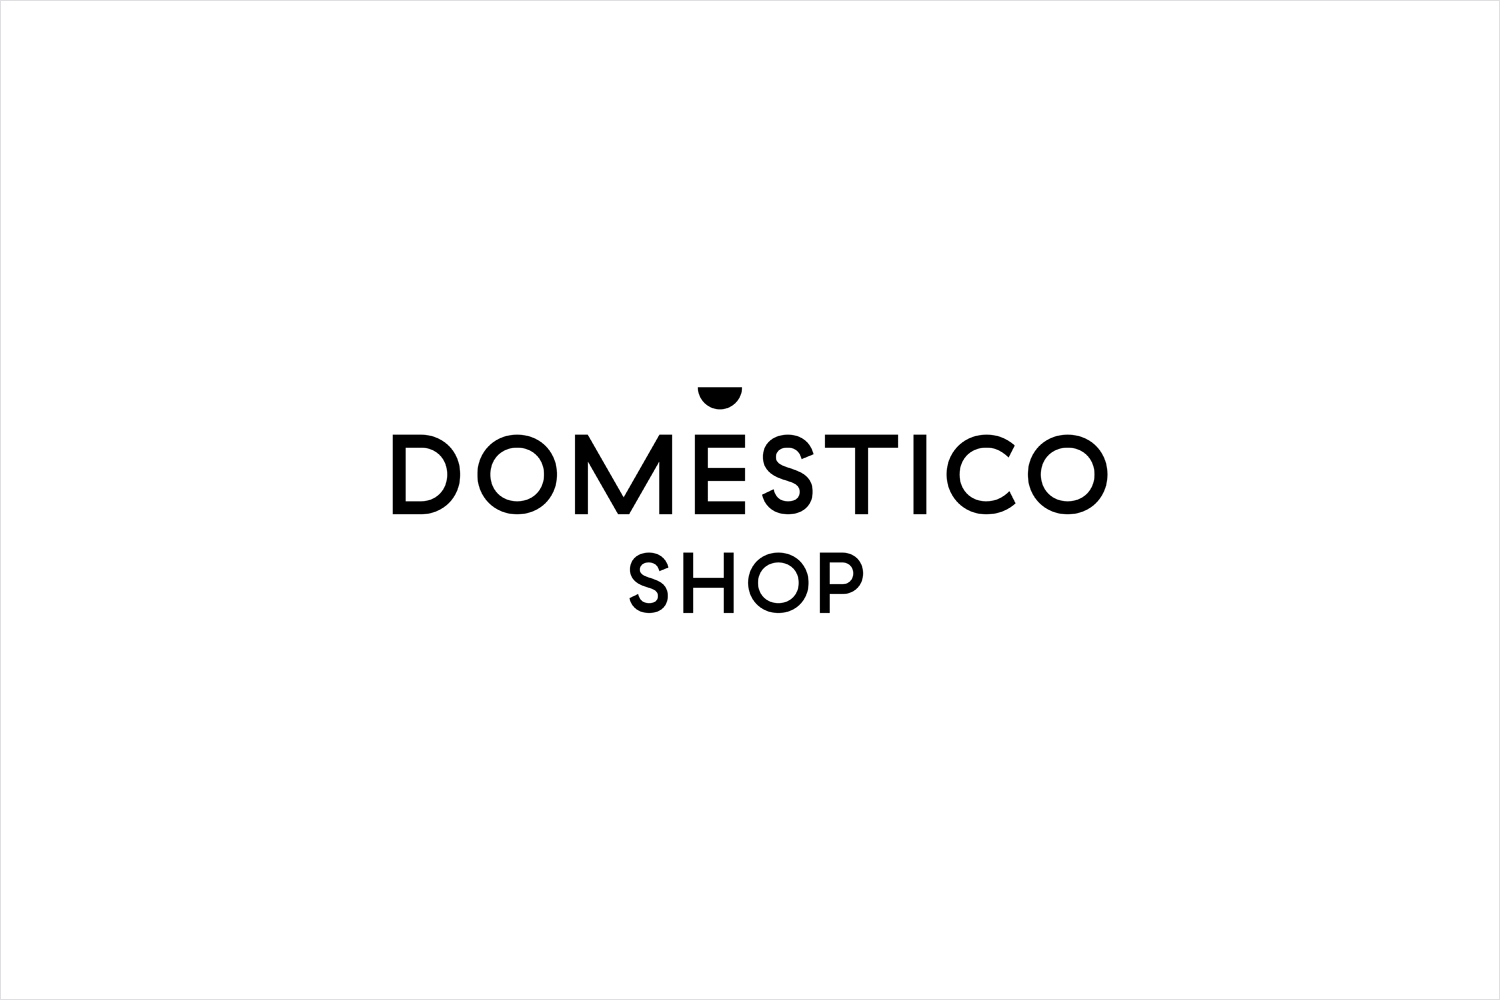 Logotype designed by Mucho for Spanish furniture retailer DomésticoShop